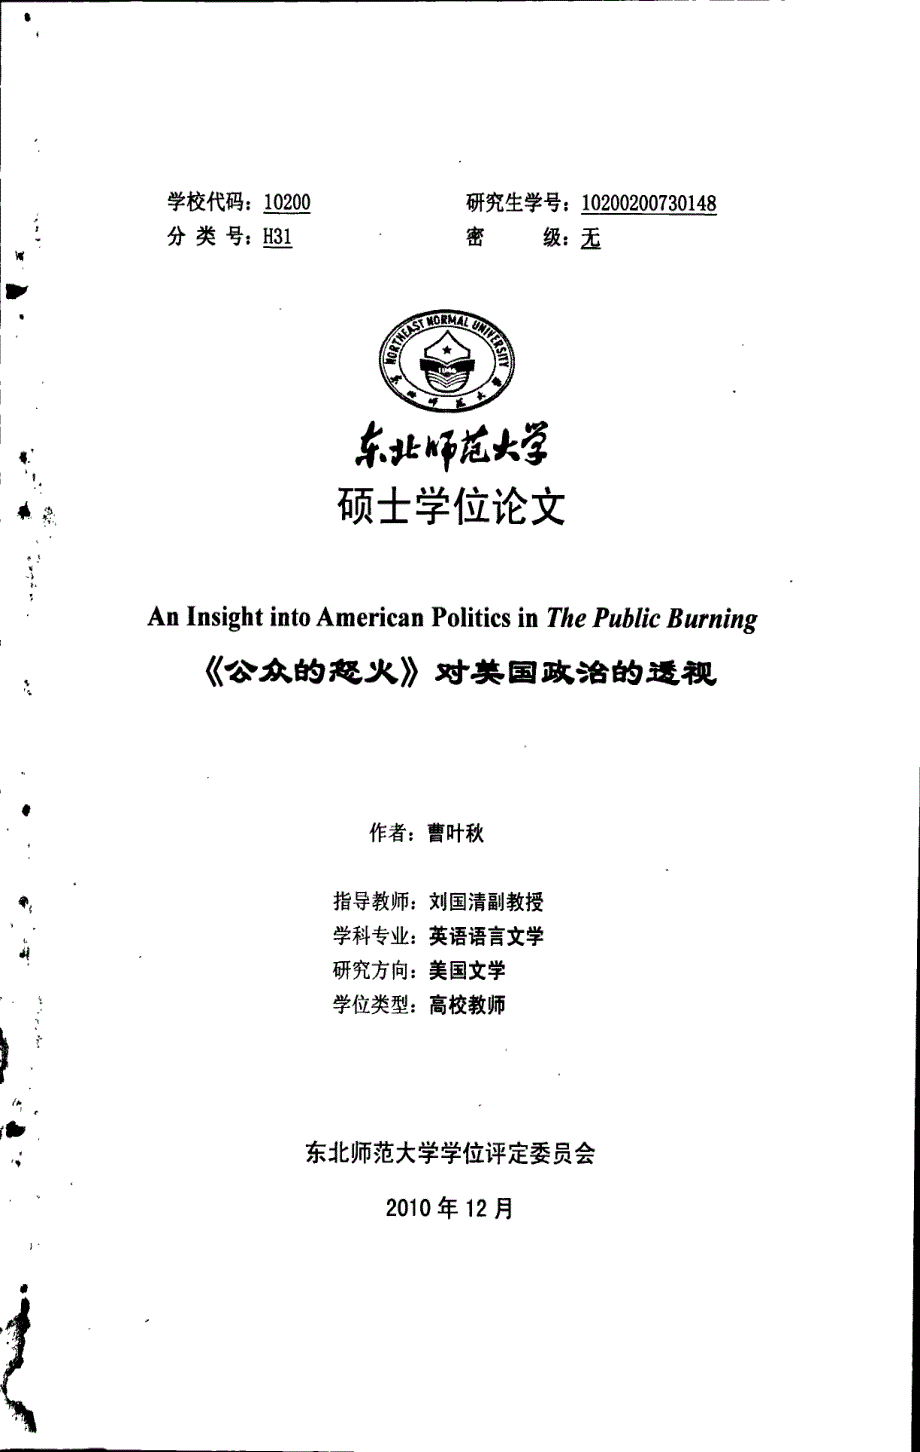 an insight into american politics in the public burning_第1页